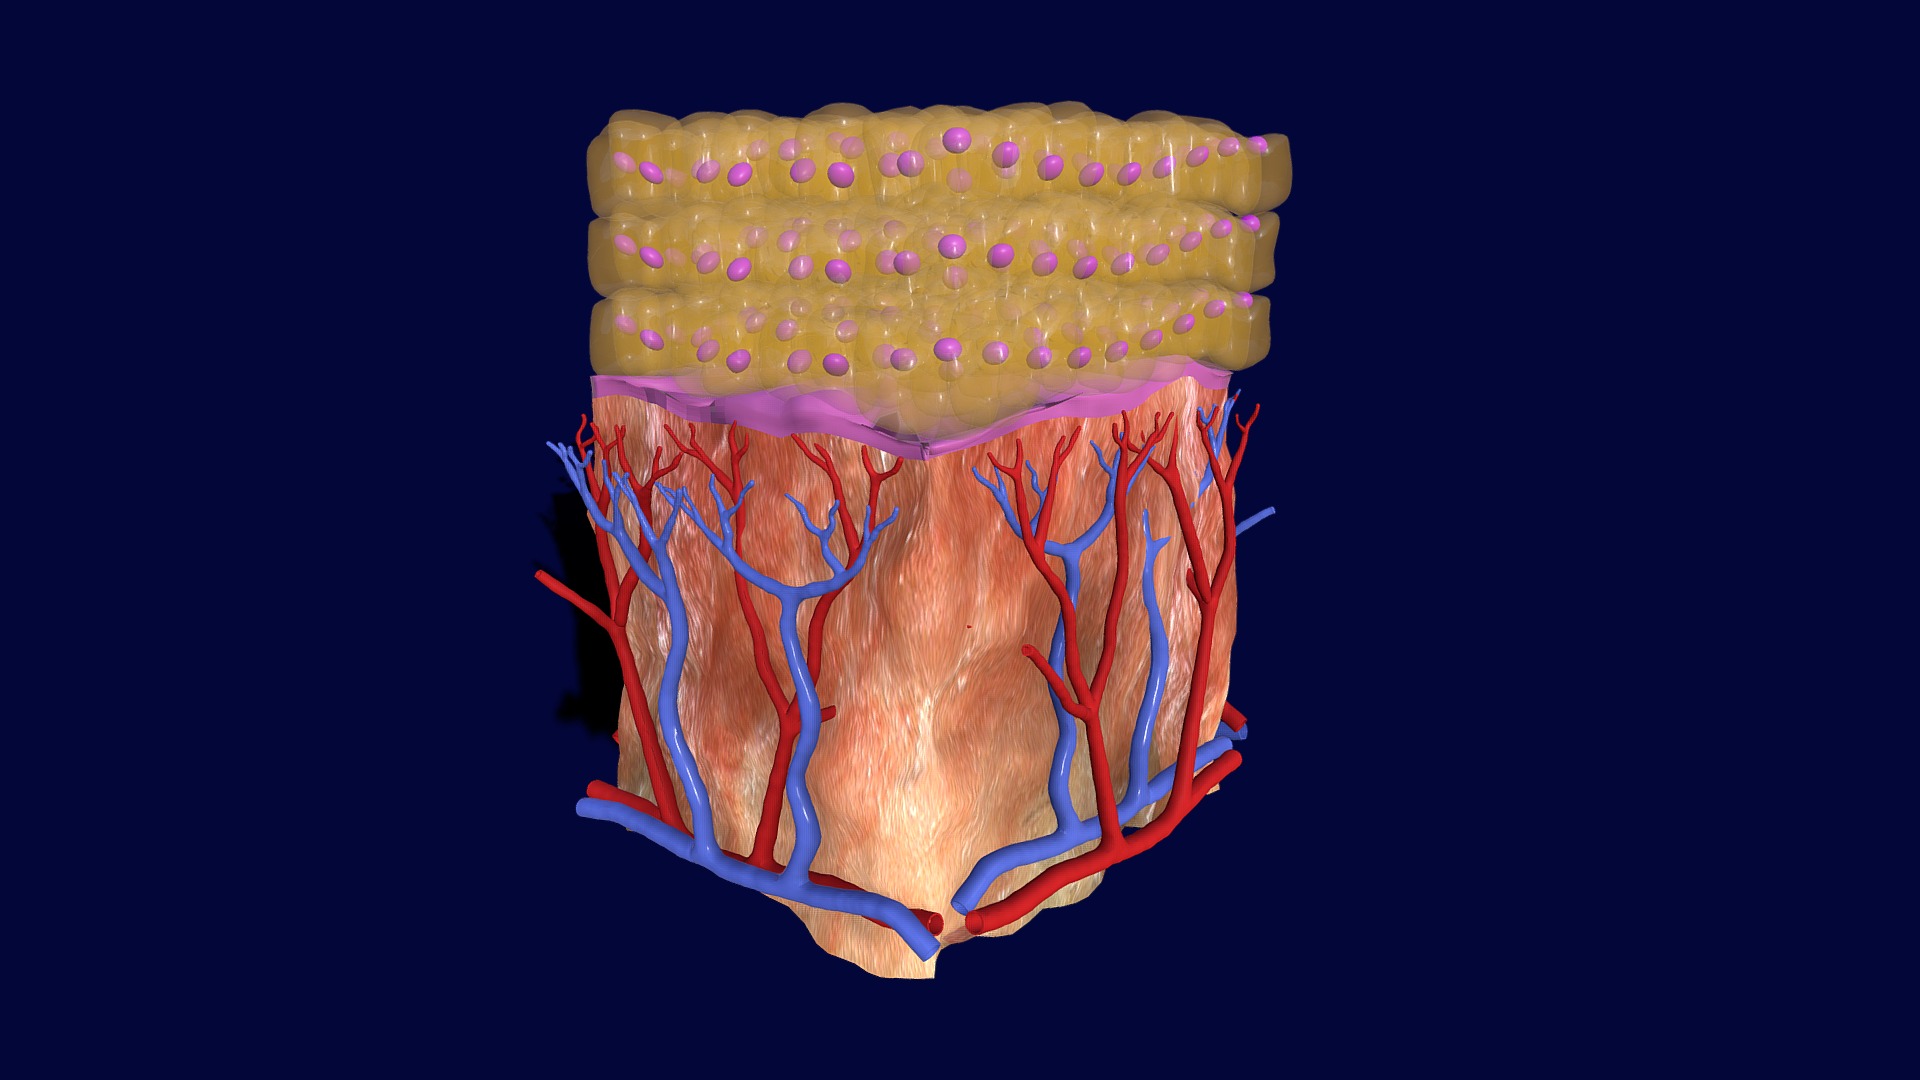 3D model Cuboidal Epithelium Multilayered - This is a 3D model of the Cuboidal Epithelium Multilayered. The 3D model is about a colorful mask with lights.